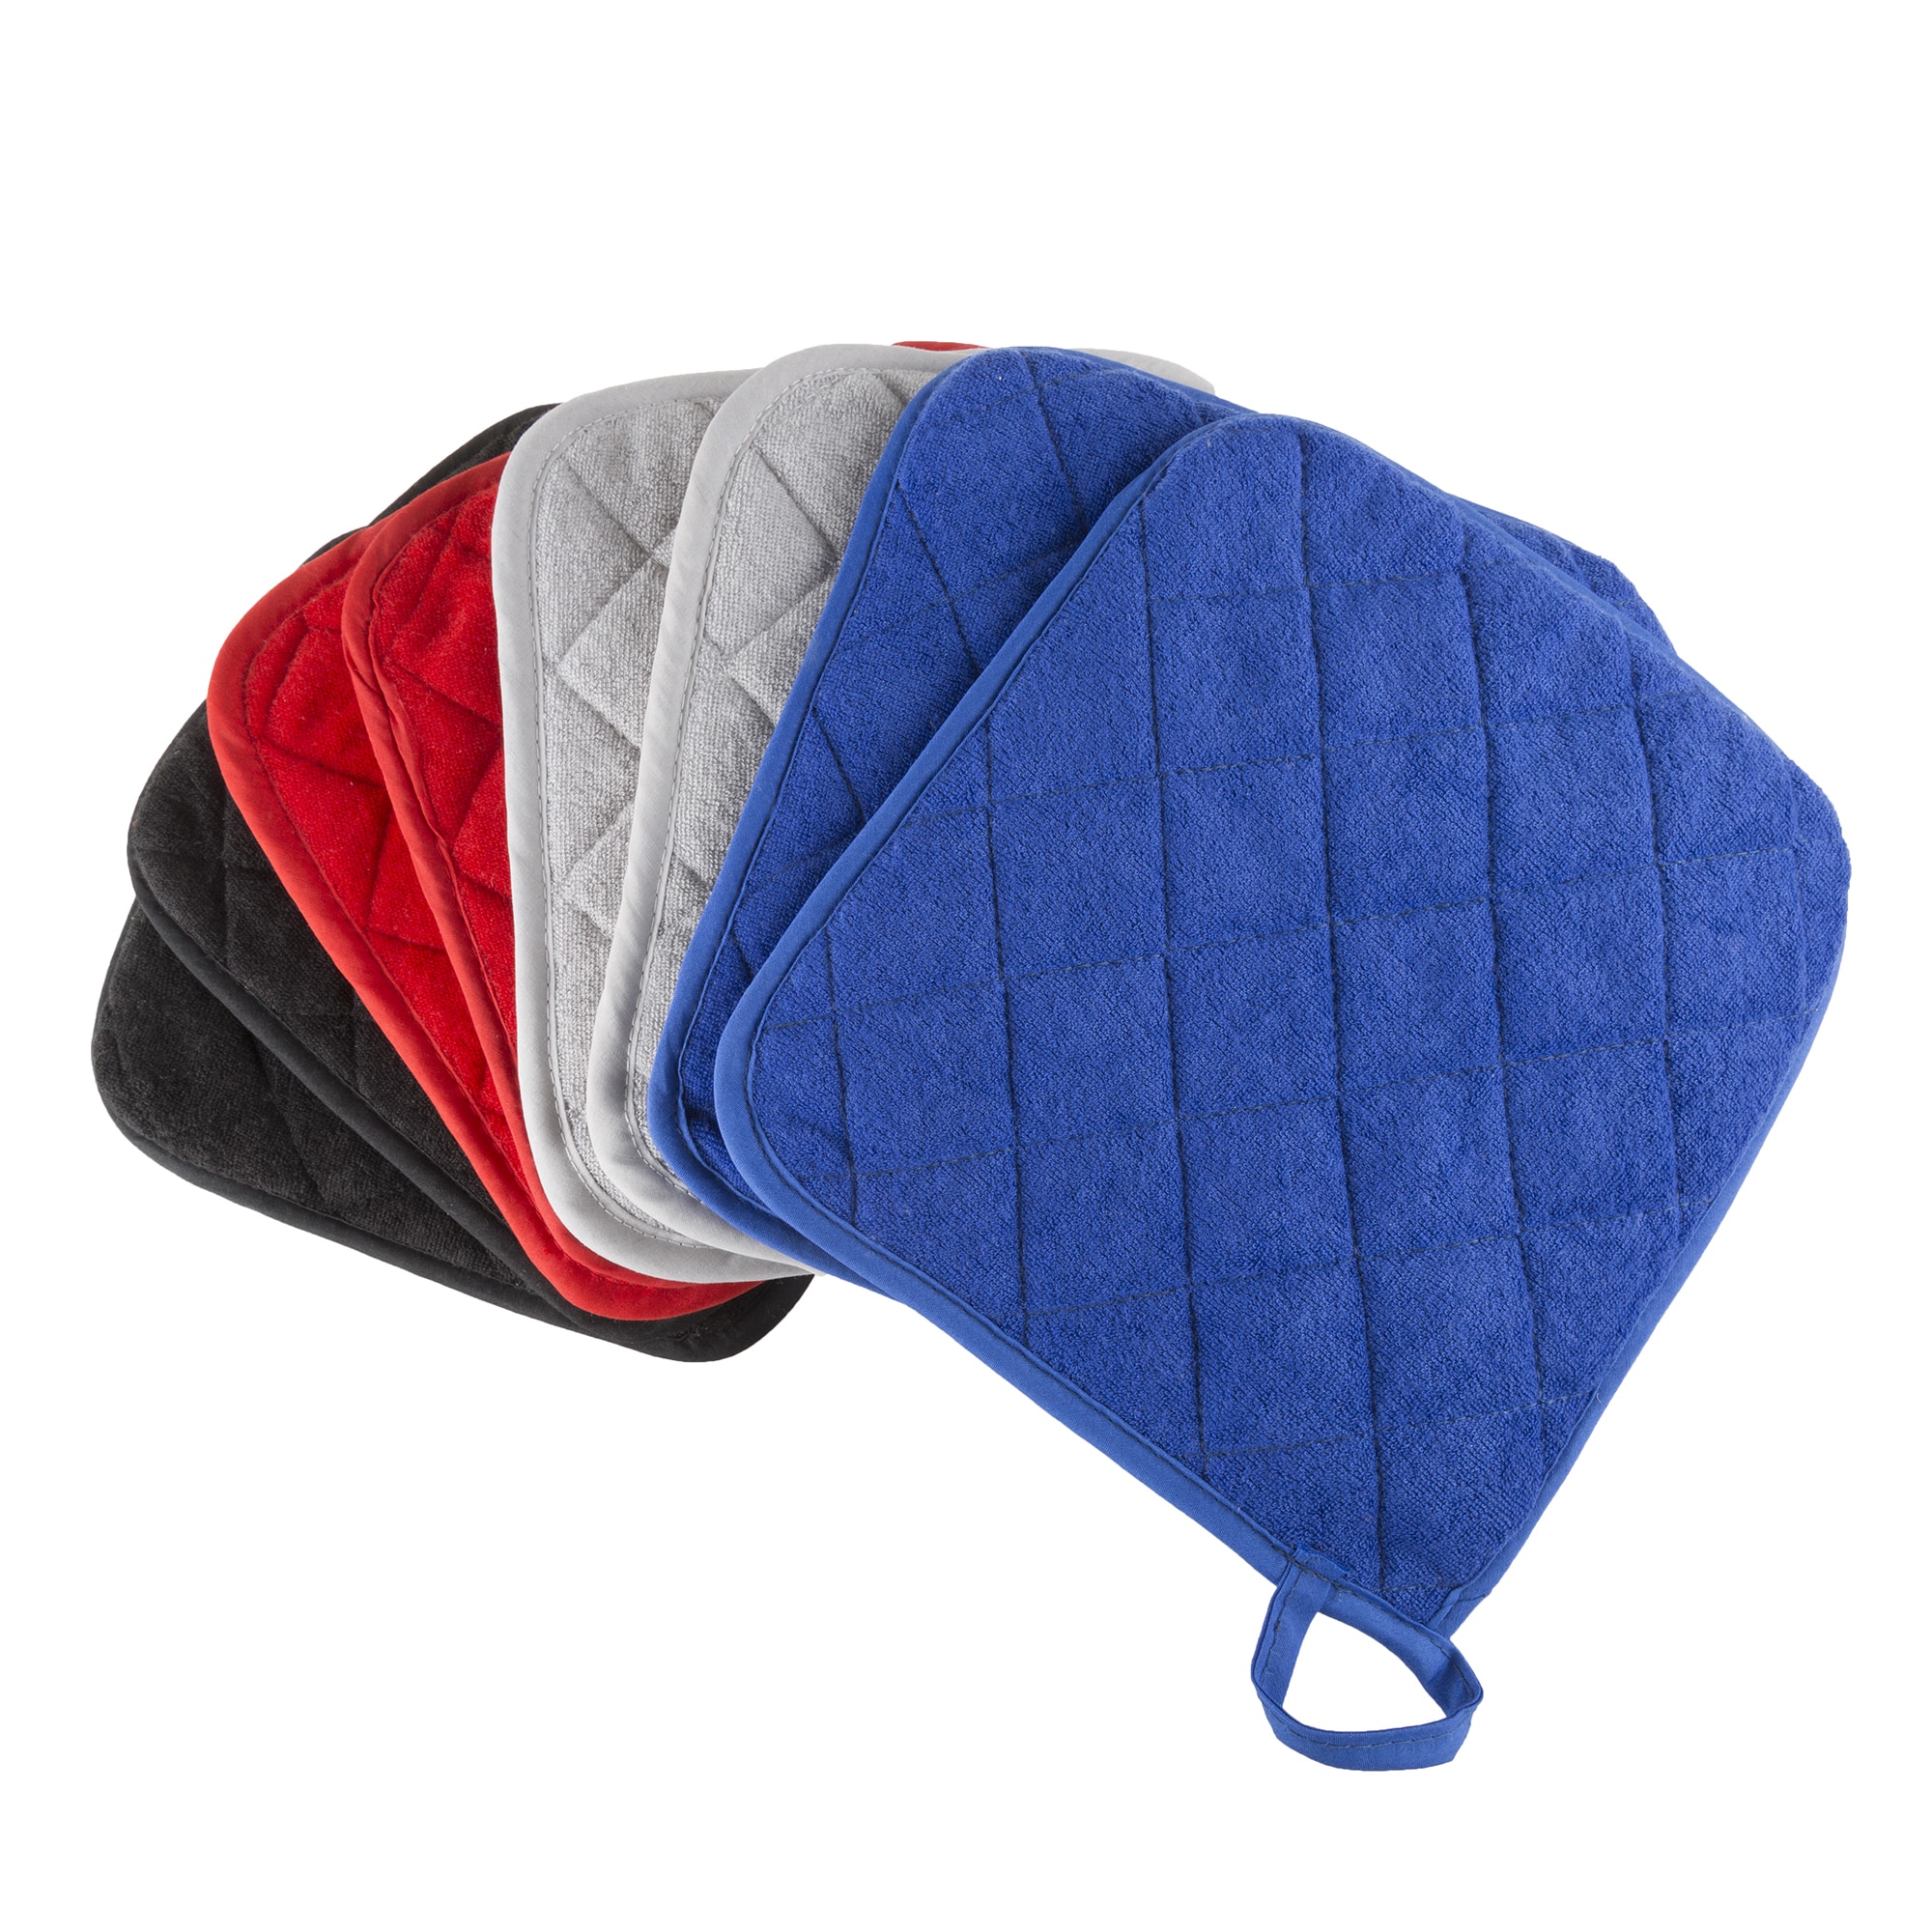 Pot Holder Set 2 Piece Oversized Heat Resistant Quilted Cotton Pot Holders By Windsor Home 49627553 Fc9a 4a12 Ac04 Ca4d34f9be0c 